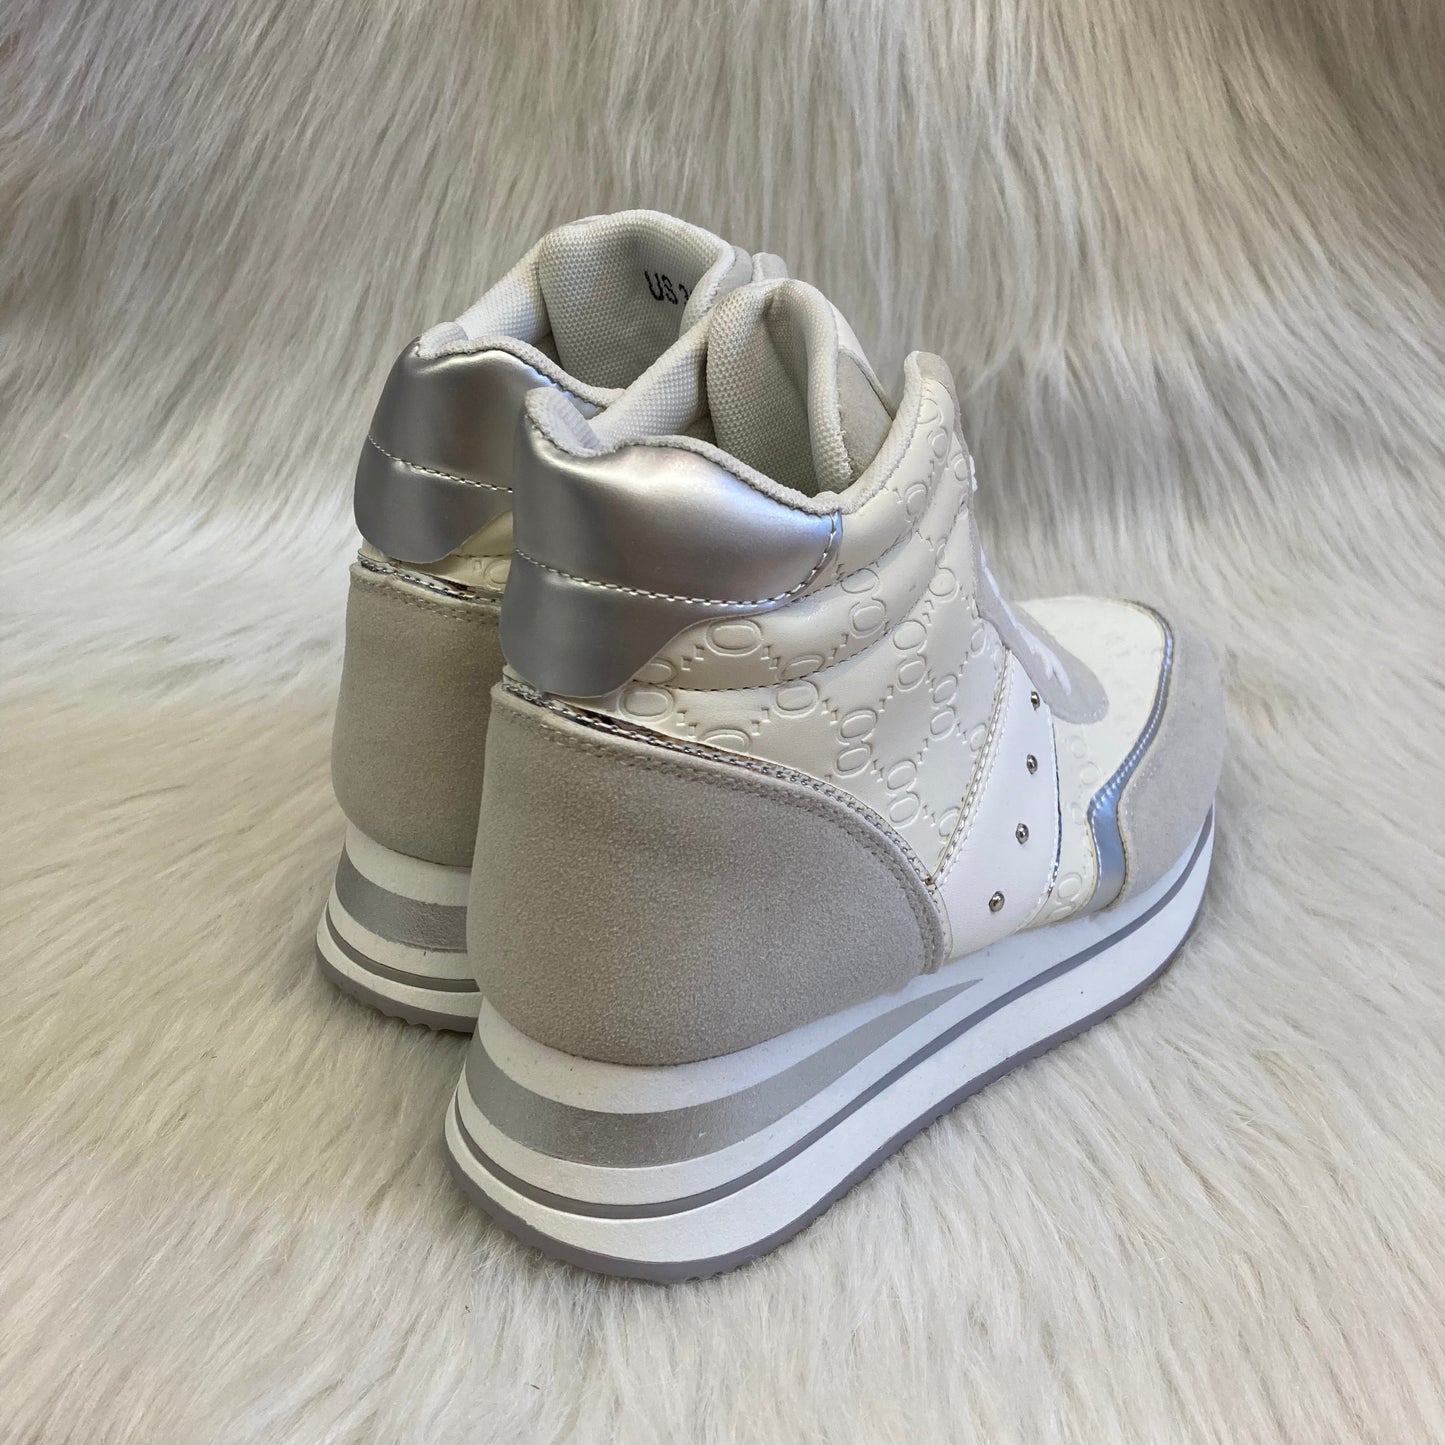 White wedge high-top trainer with pattern inspired